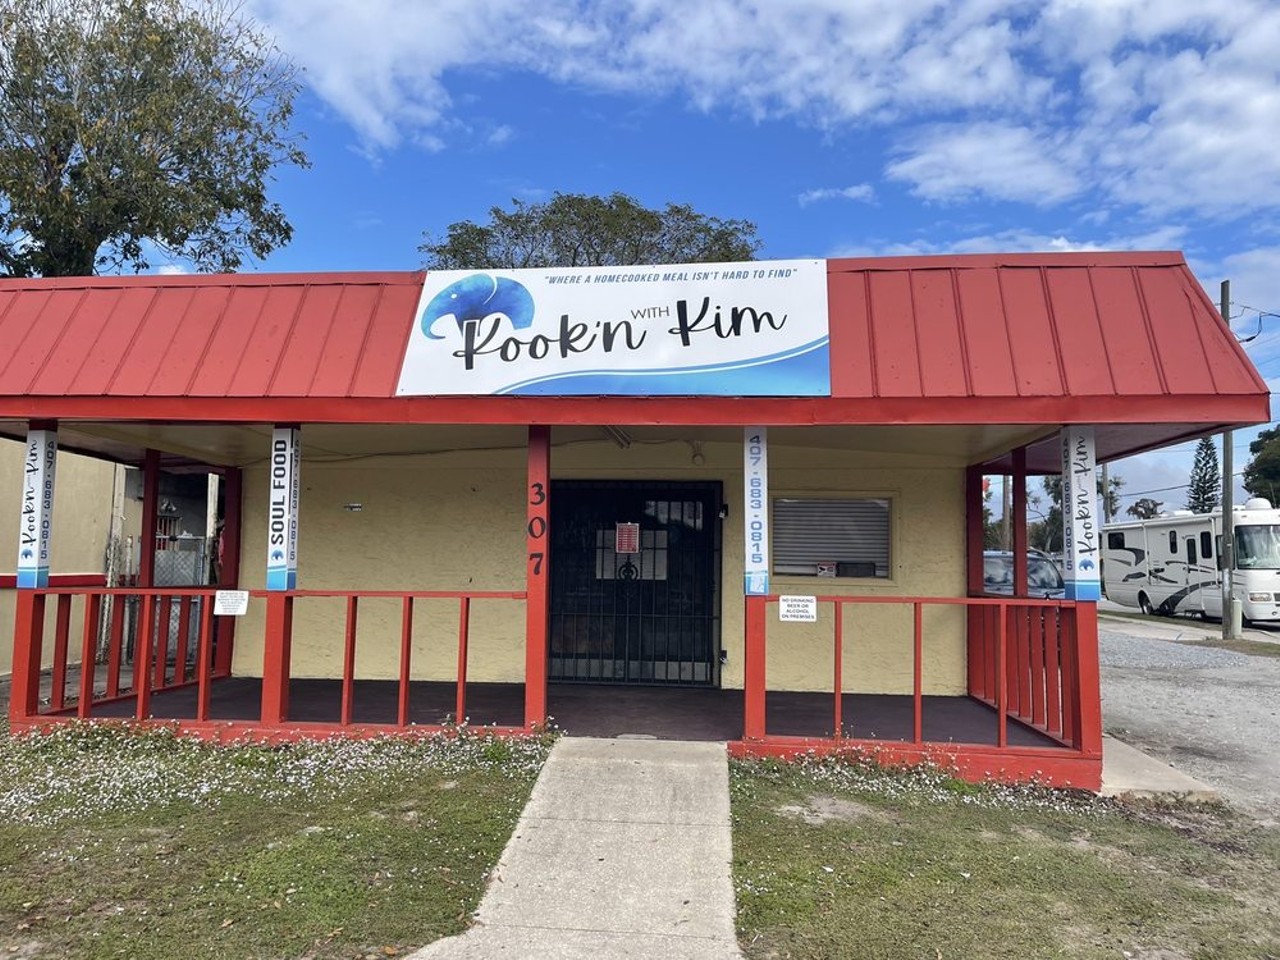 Kook&#146;n With Kim 
307 West Kennedy Blvd, 407-683-0815
At Kook&#146;n with Kim, a home cooked meal &#147;isn&#146;t hard to find&#148; as Kim serves southern style meals with Asian influences at this family based company.
Photo via William K./Yelp